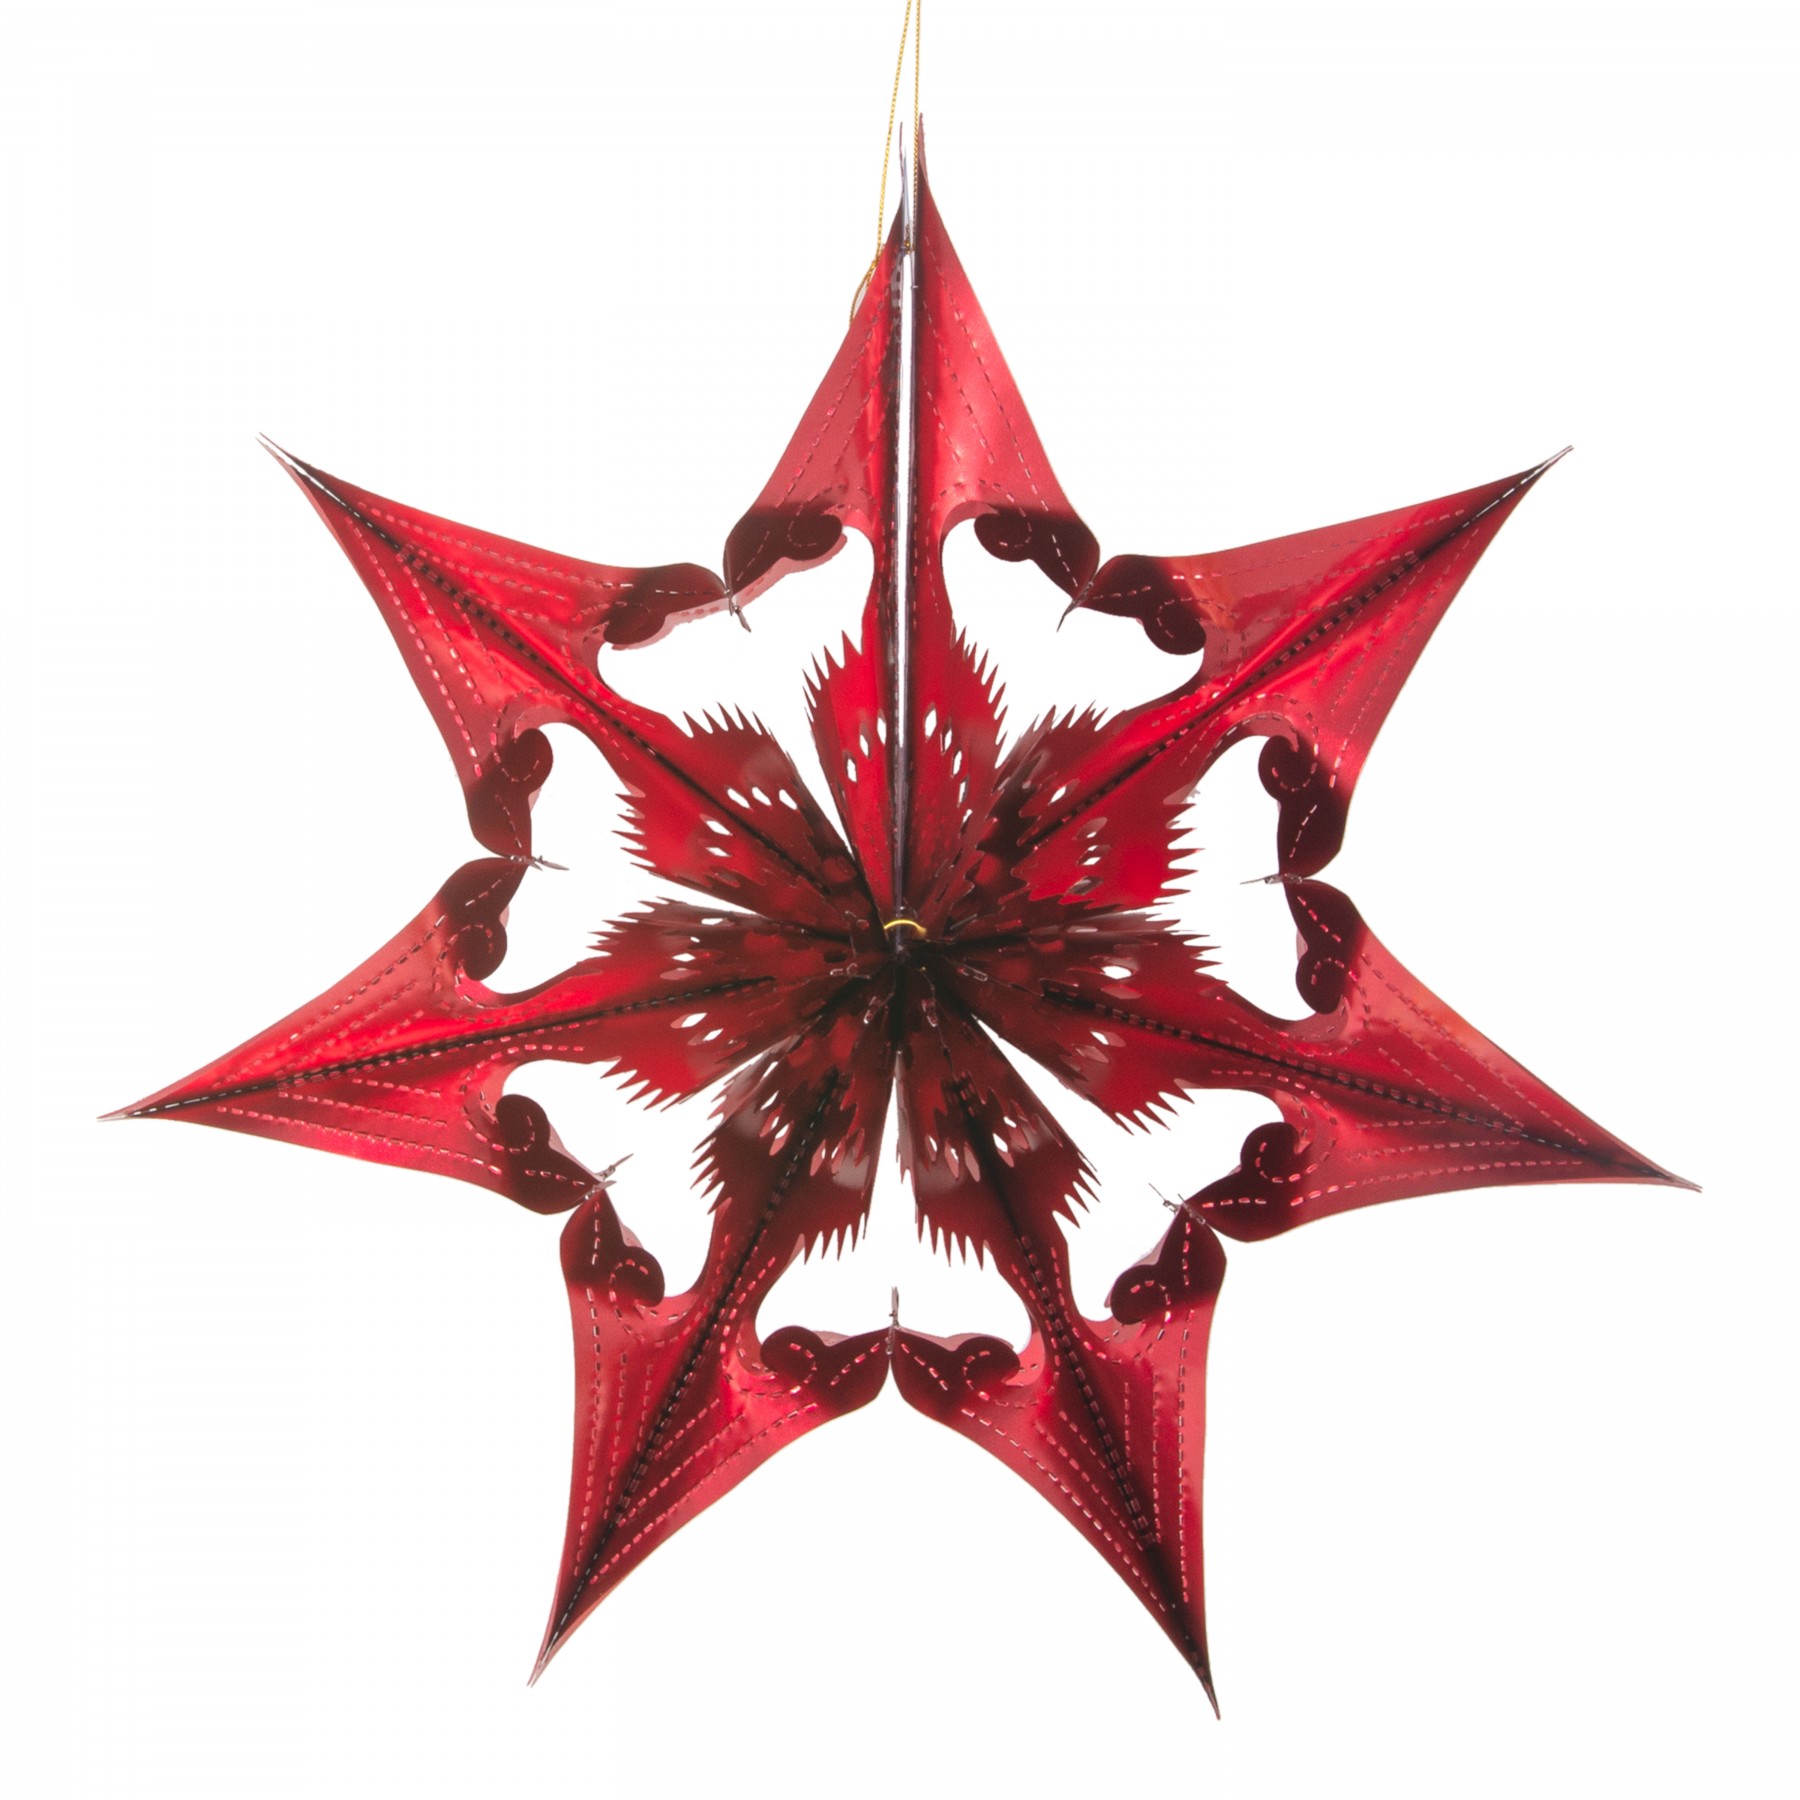 star with spherical centre decoration - red